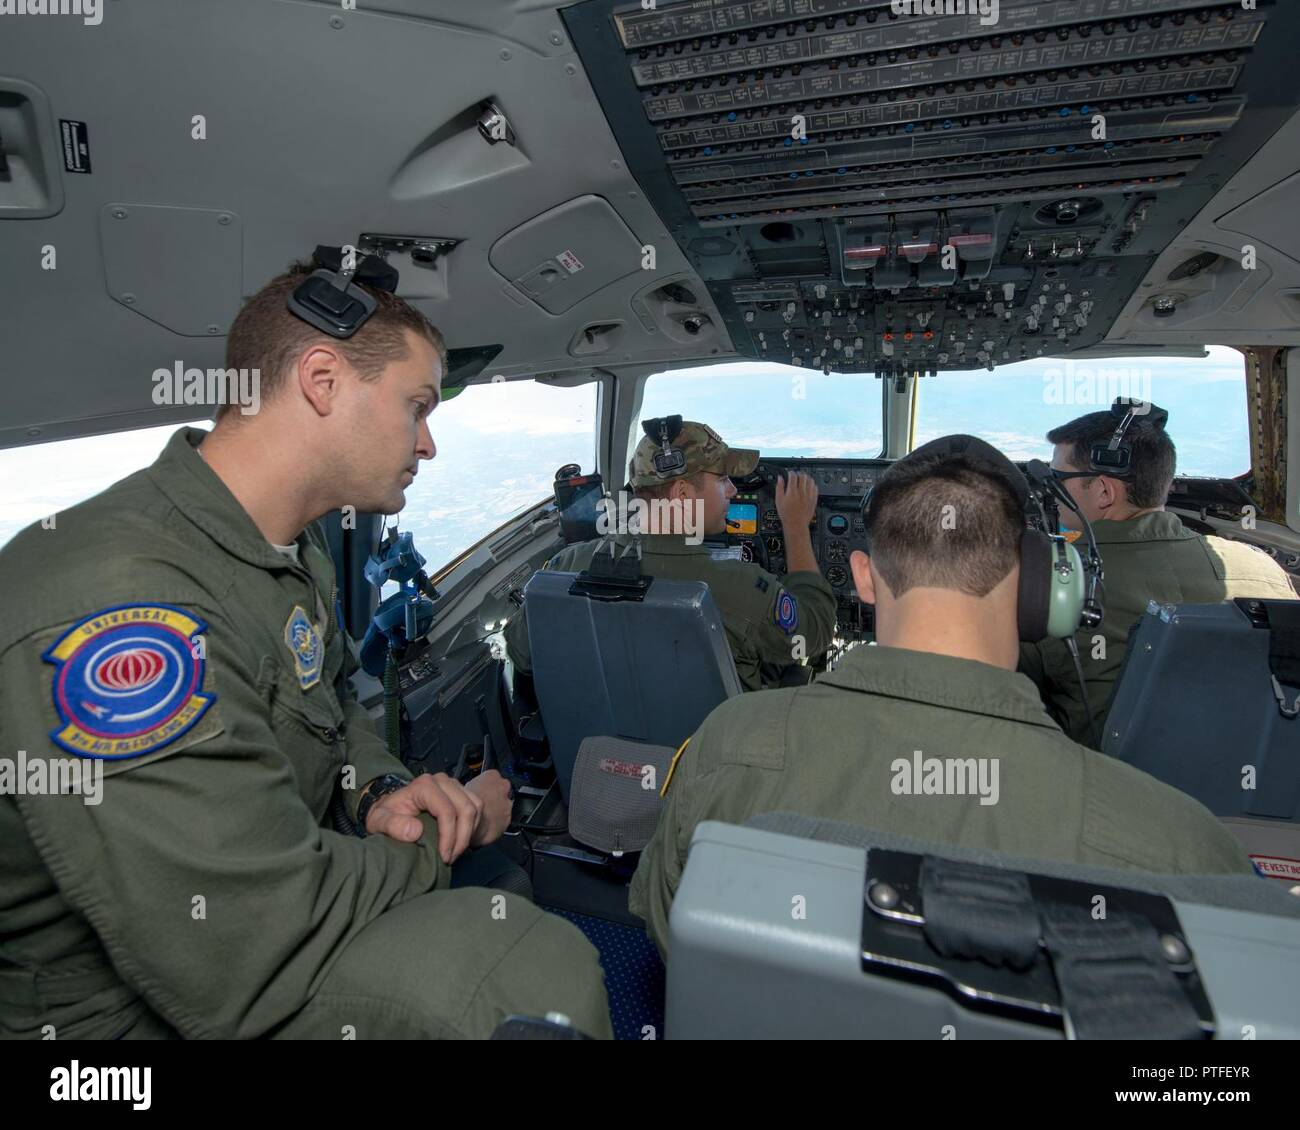 Aircrew members from the 9th Air Refueling Squadron, Travis Air Force Base, Calif., fly a training mission in Northern Calif., July 20, 2017. Part of the mission included an air refueling of a C-17 Globemaster III from the 301st Airlift Squadron, 349th Air Mobility Wing. Stock Photo